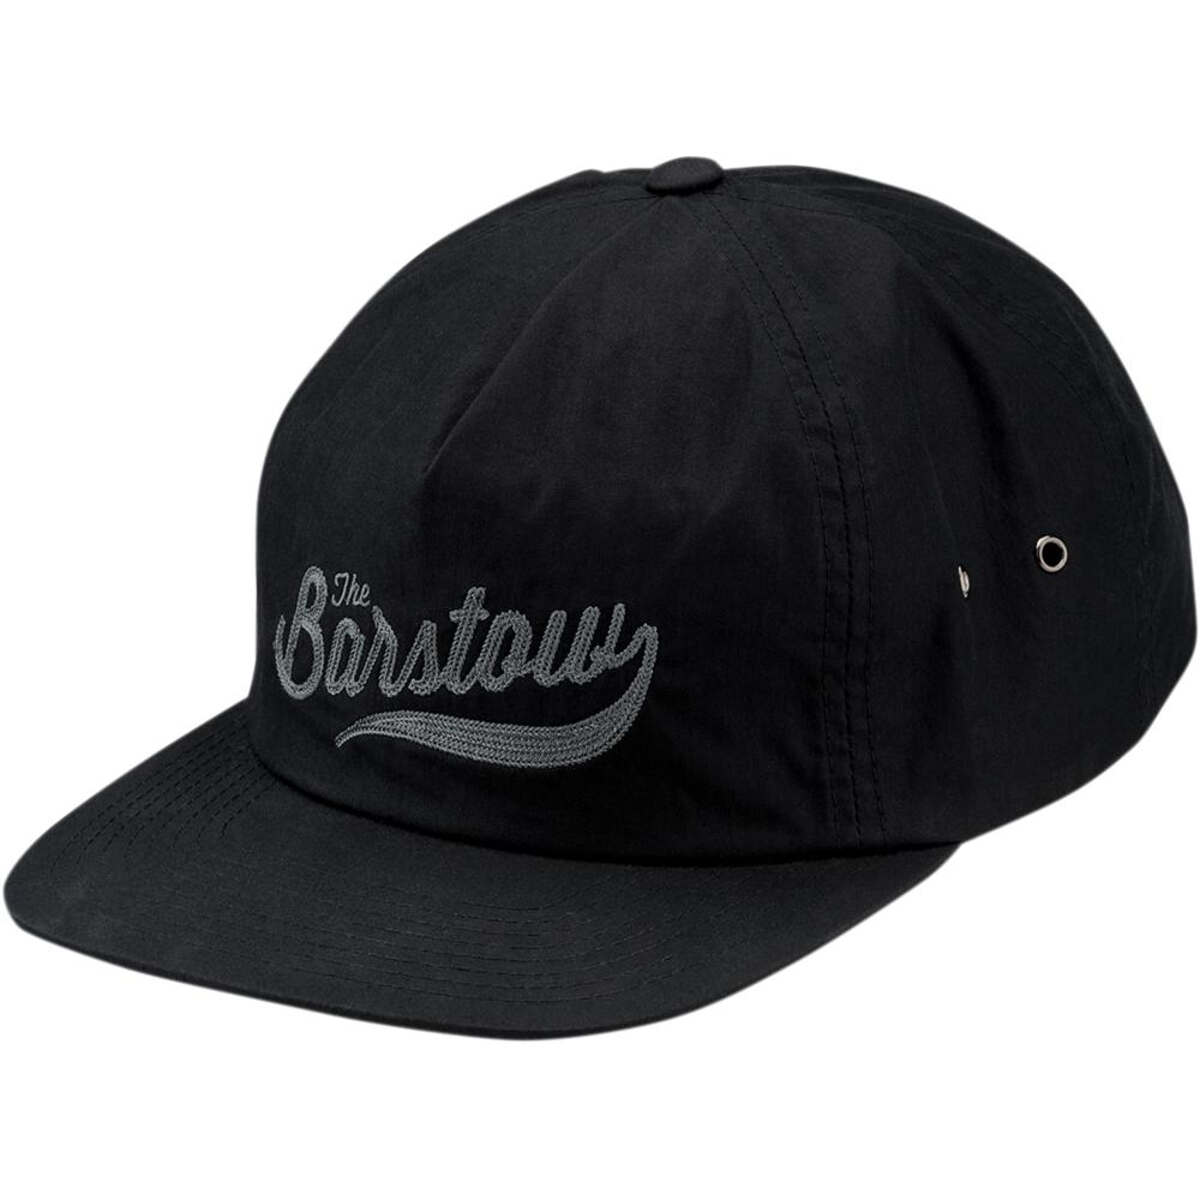 100% Cappellino Snap Back The Barstow Black